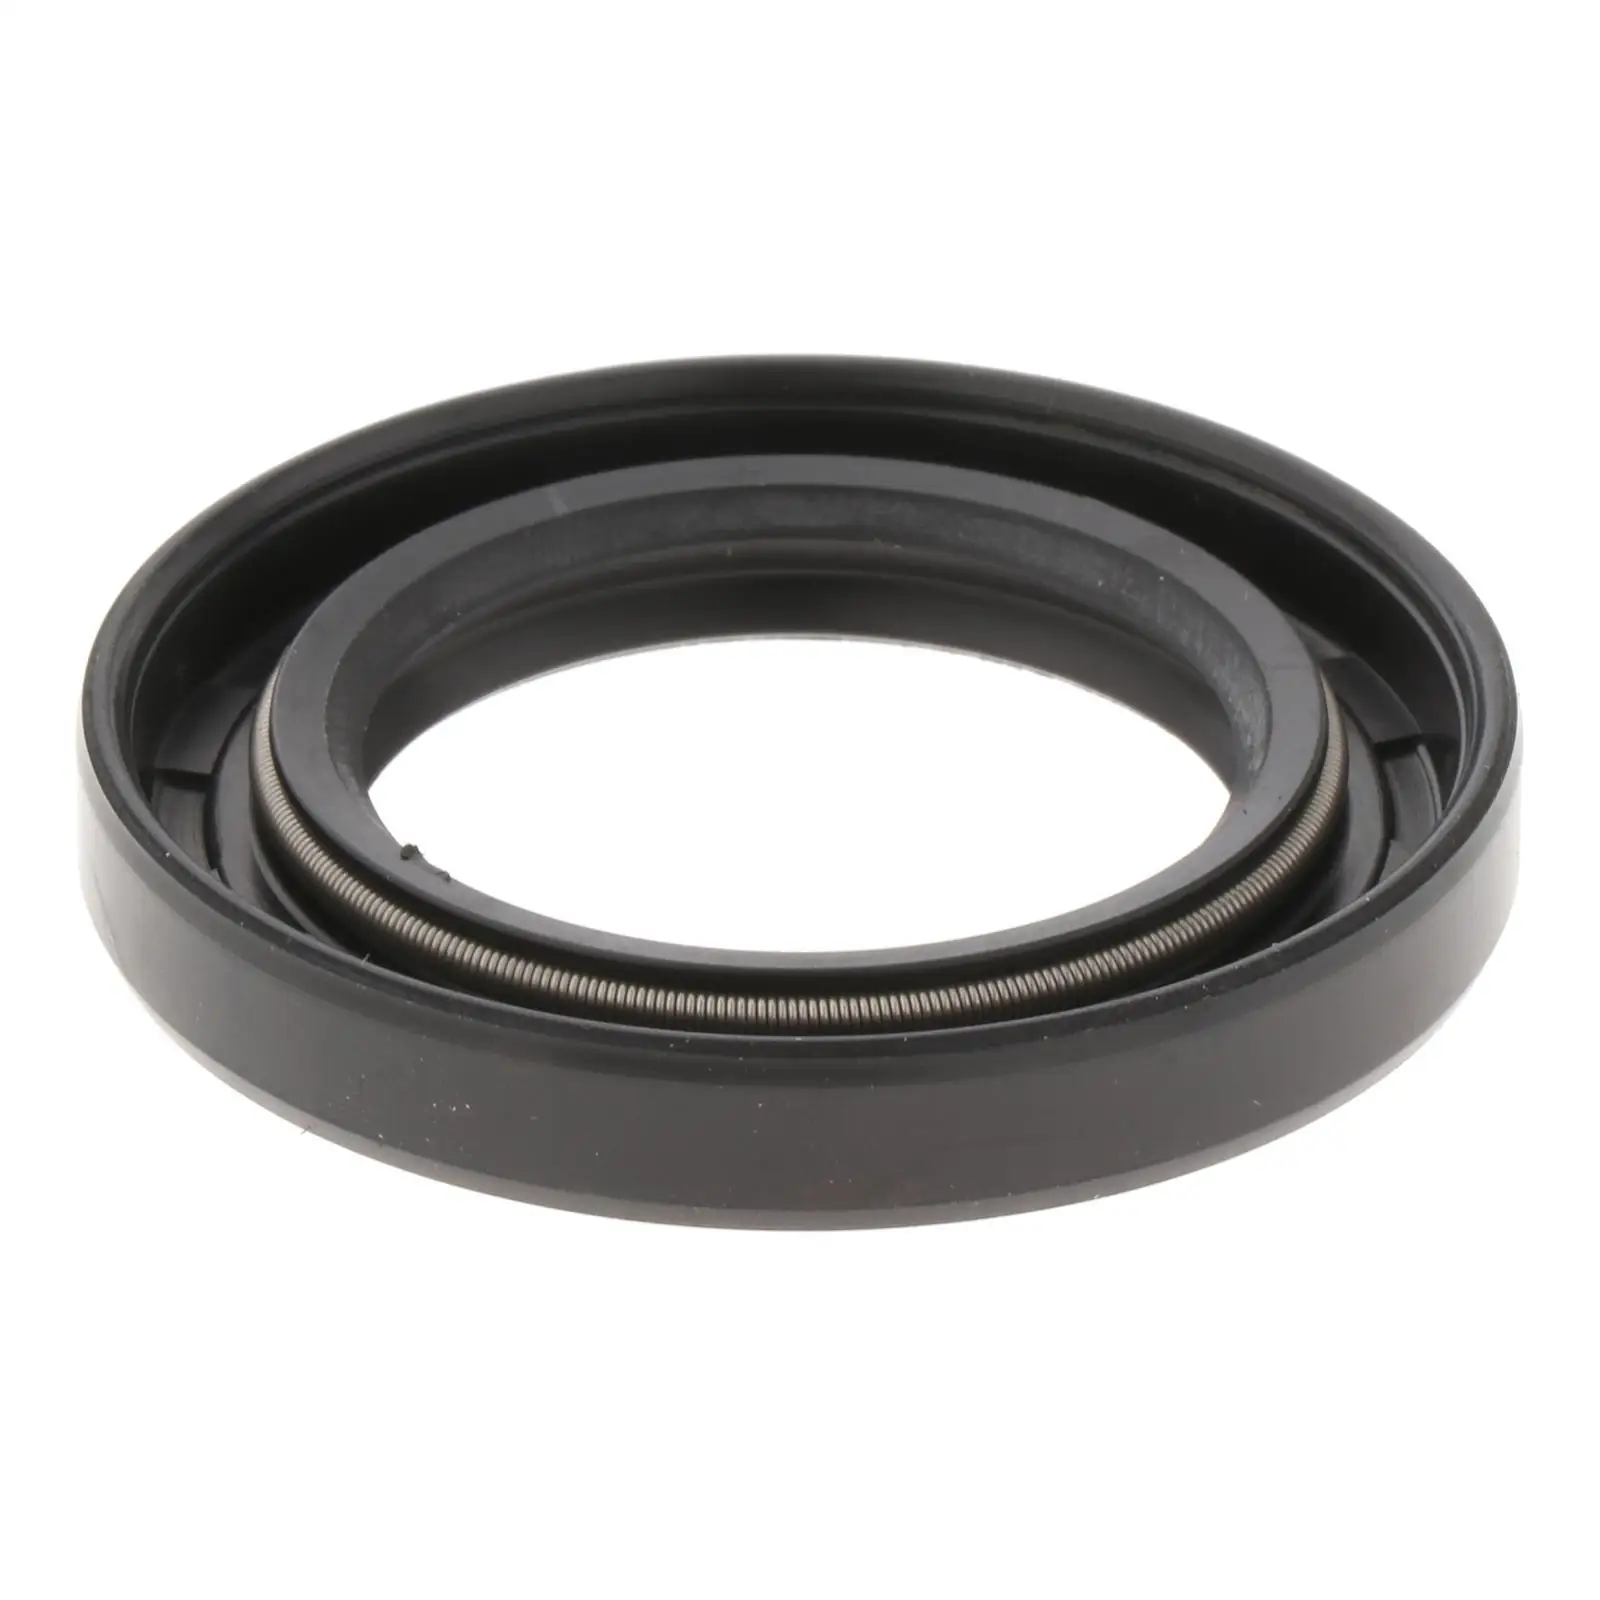 Oil Seal, 93102-30M23, Fit for Yamaha Outboard Motor 2T 60HP-90HP Accessory